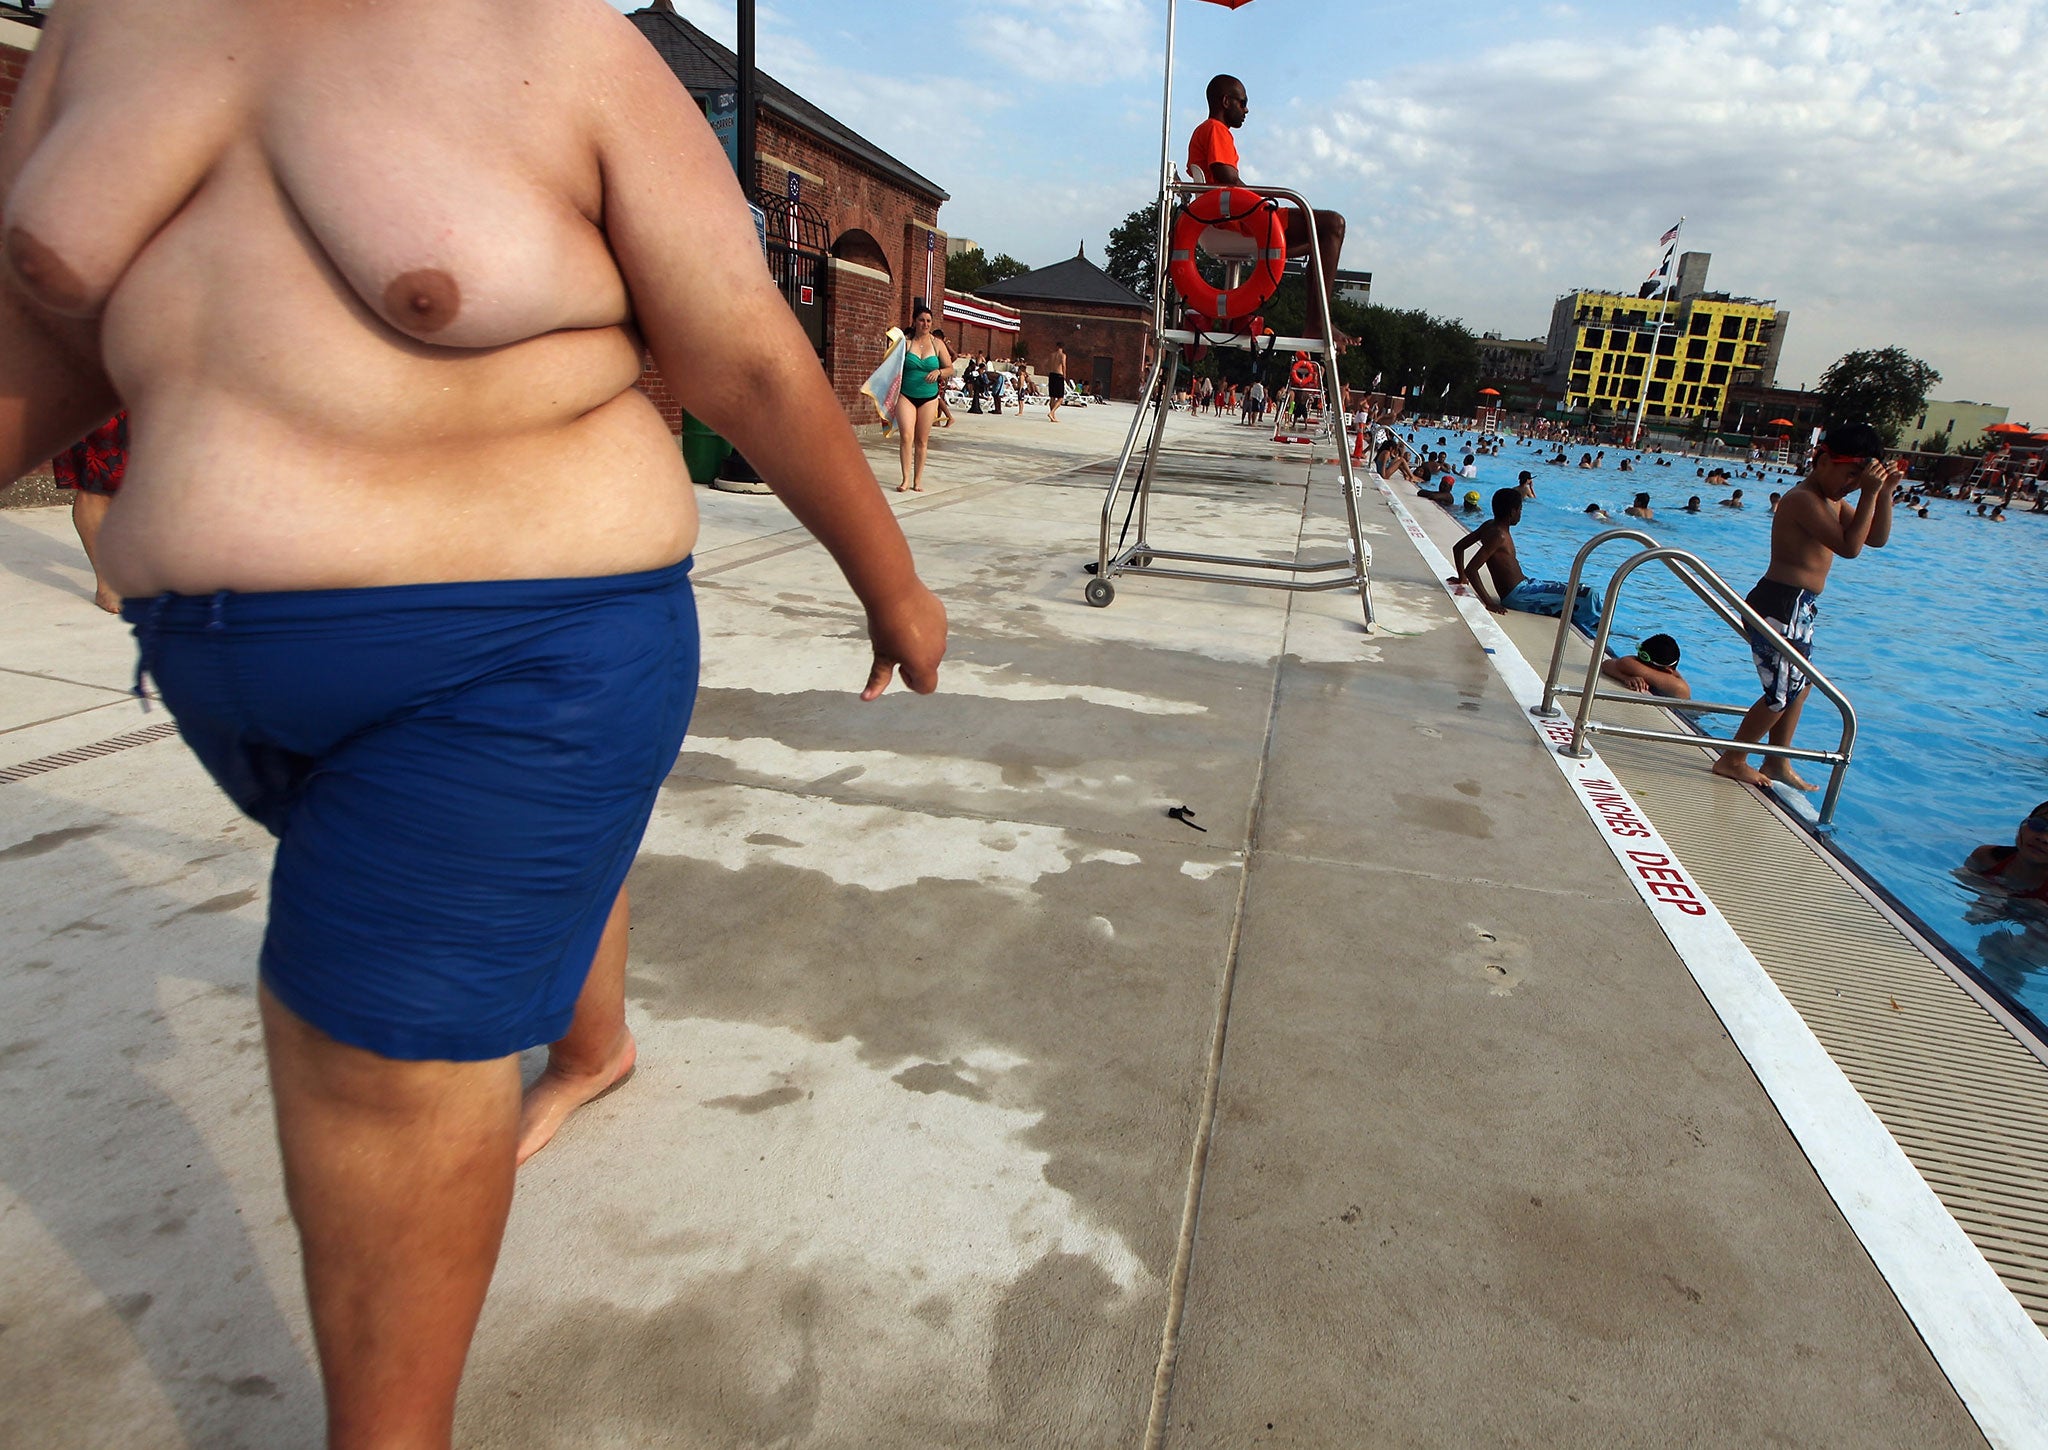 An obese man cools off by a pool